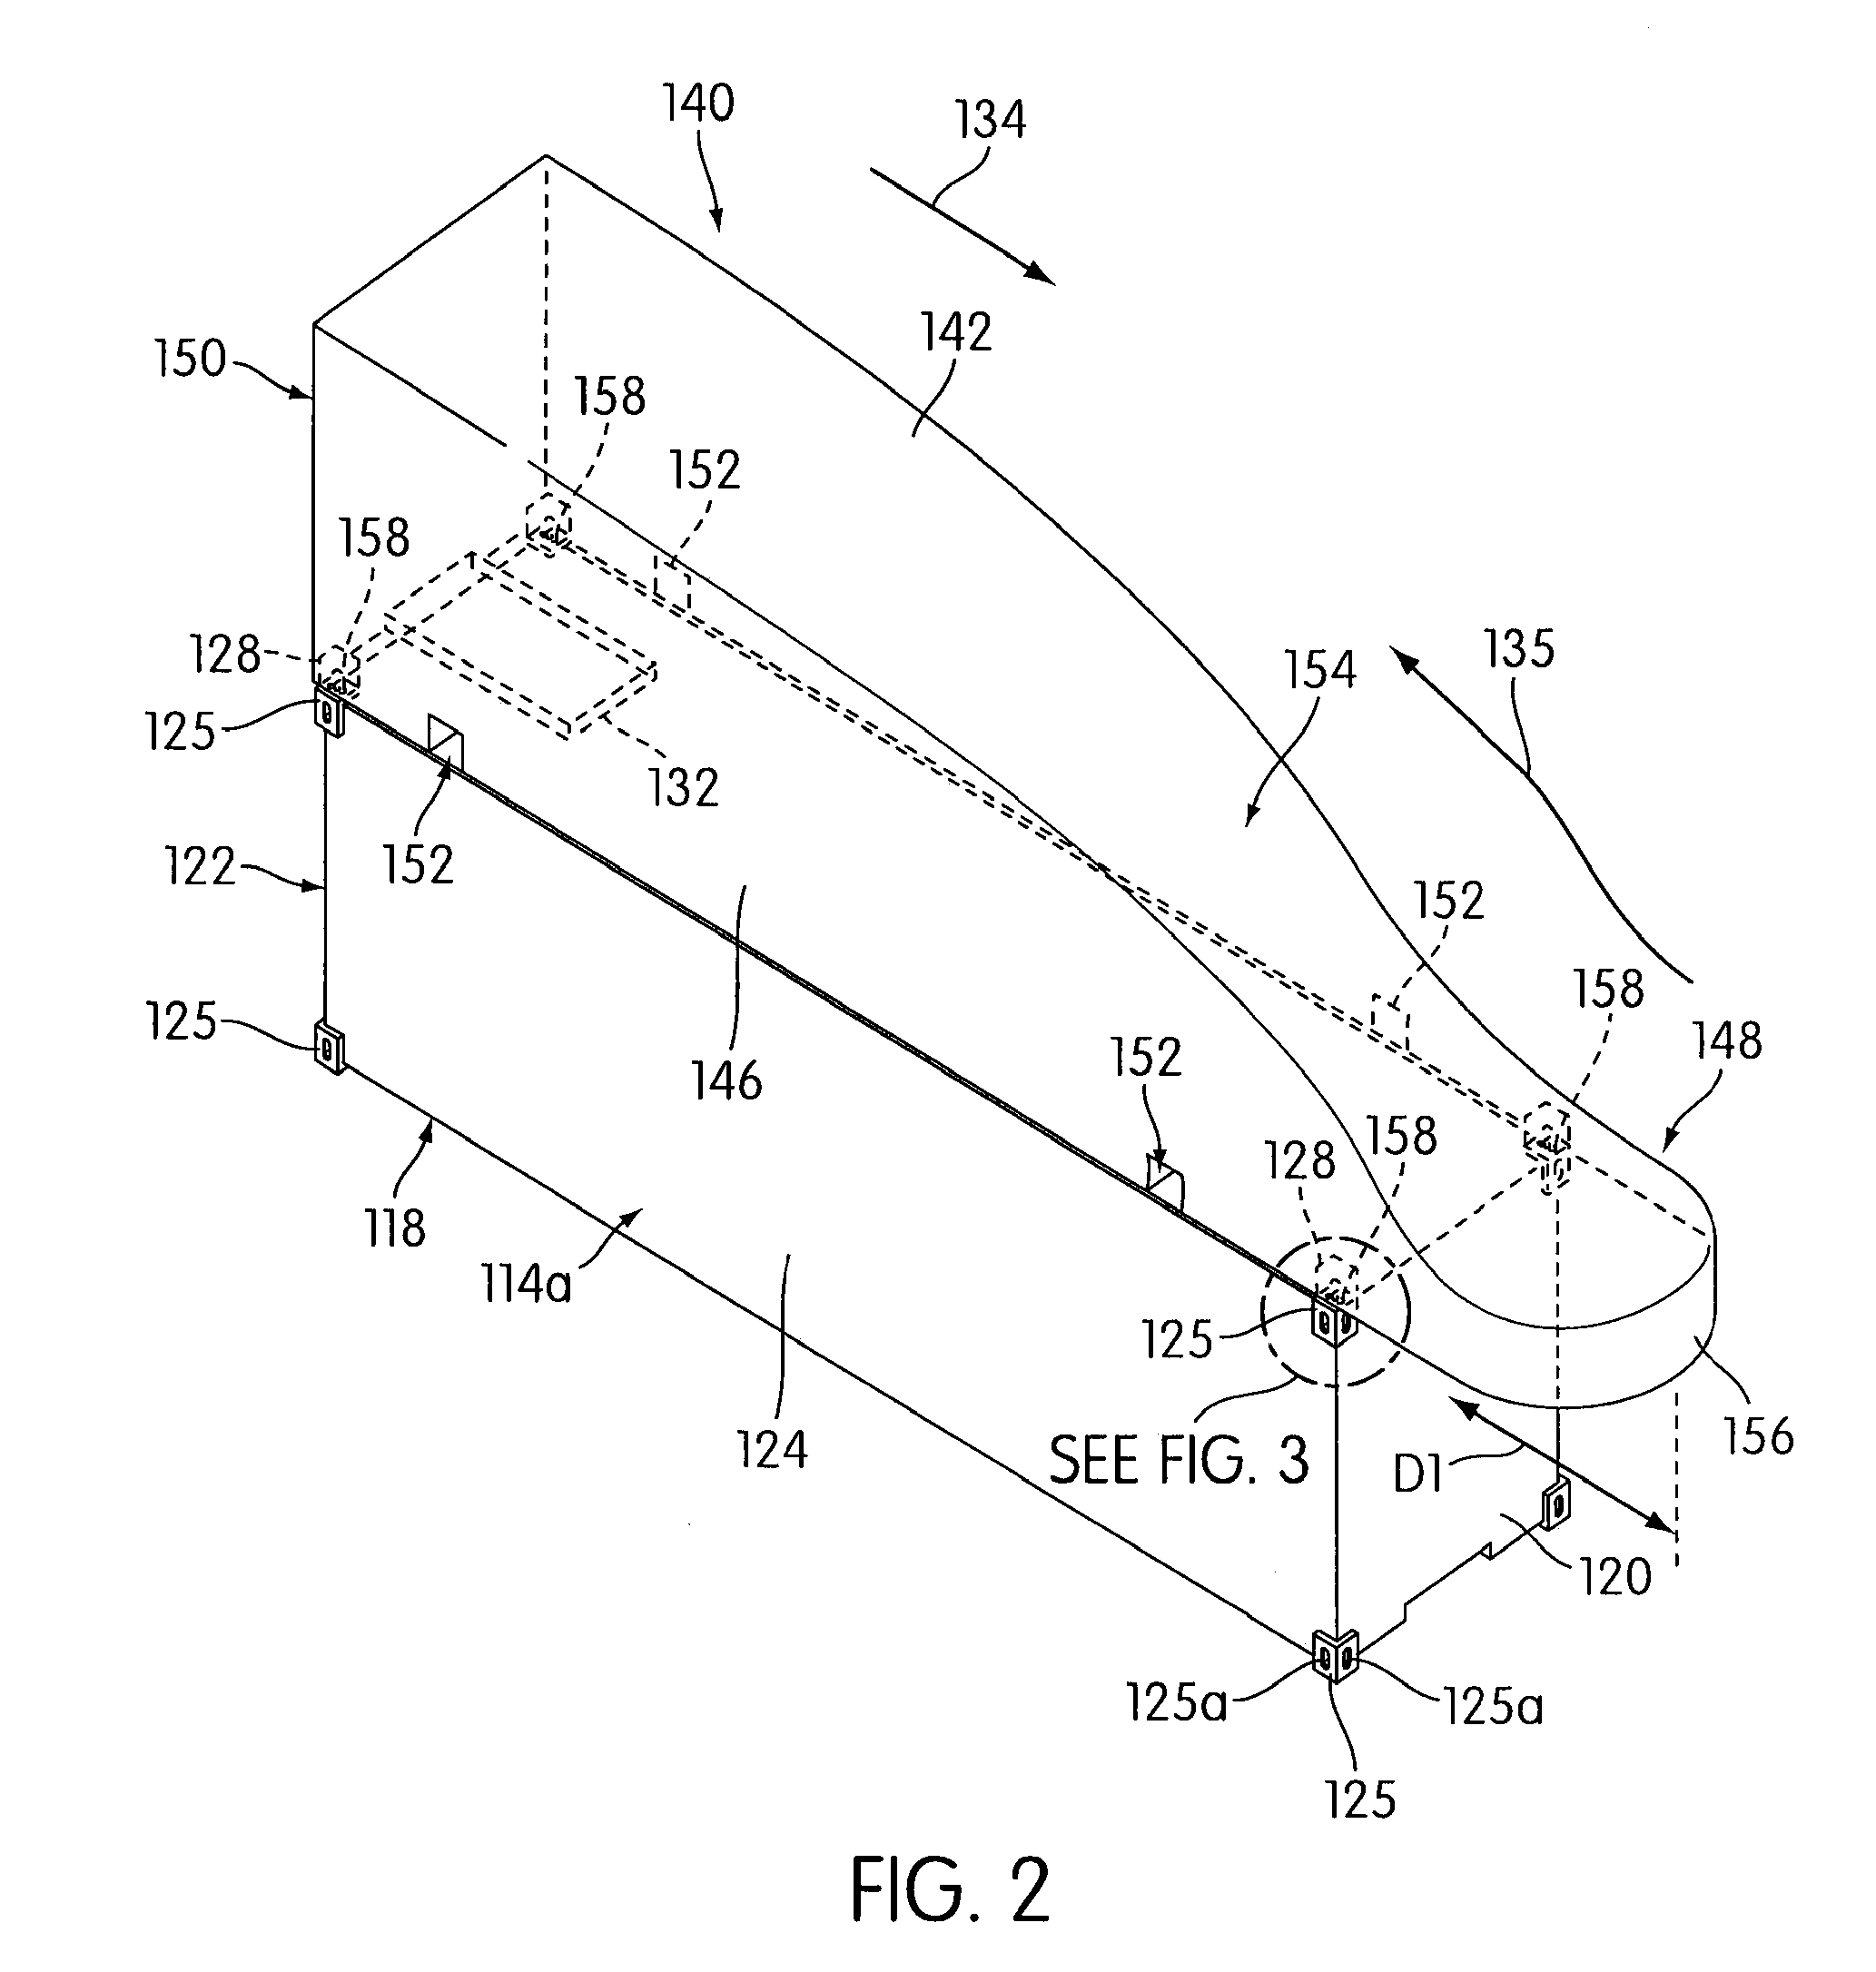 Aerodynamic pseudocontainers for reducing drag associated with stacked intermodal containers